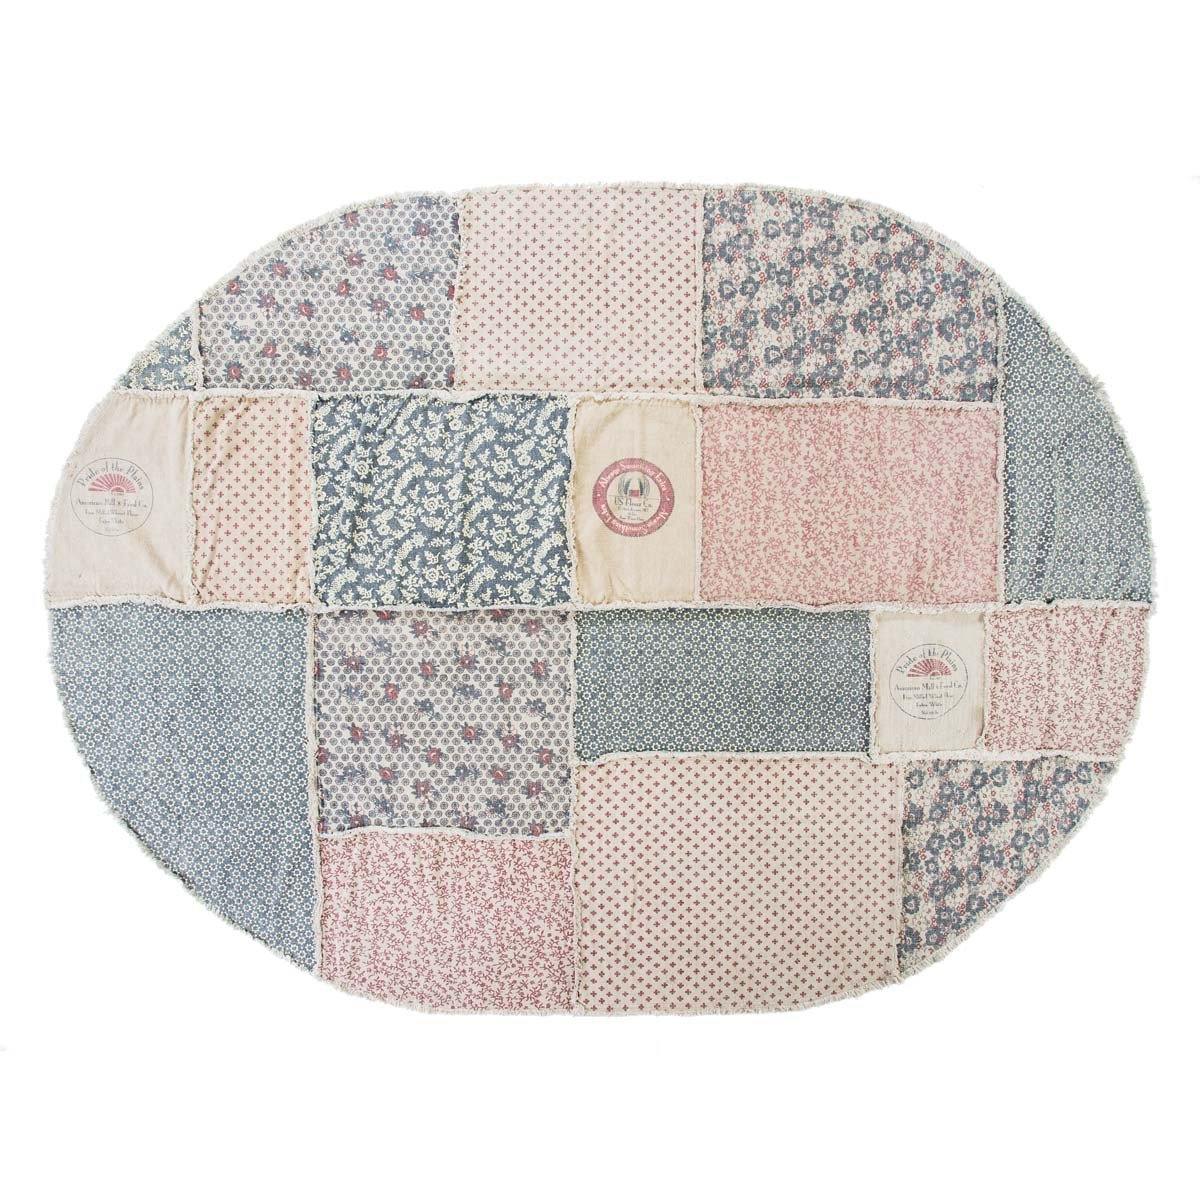 Millie Patchwork Rug Oval 8'x11' VHC Brands - The Fox Decor